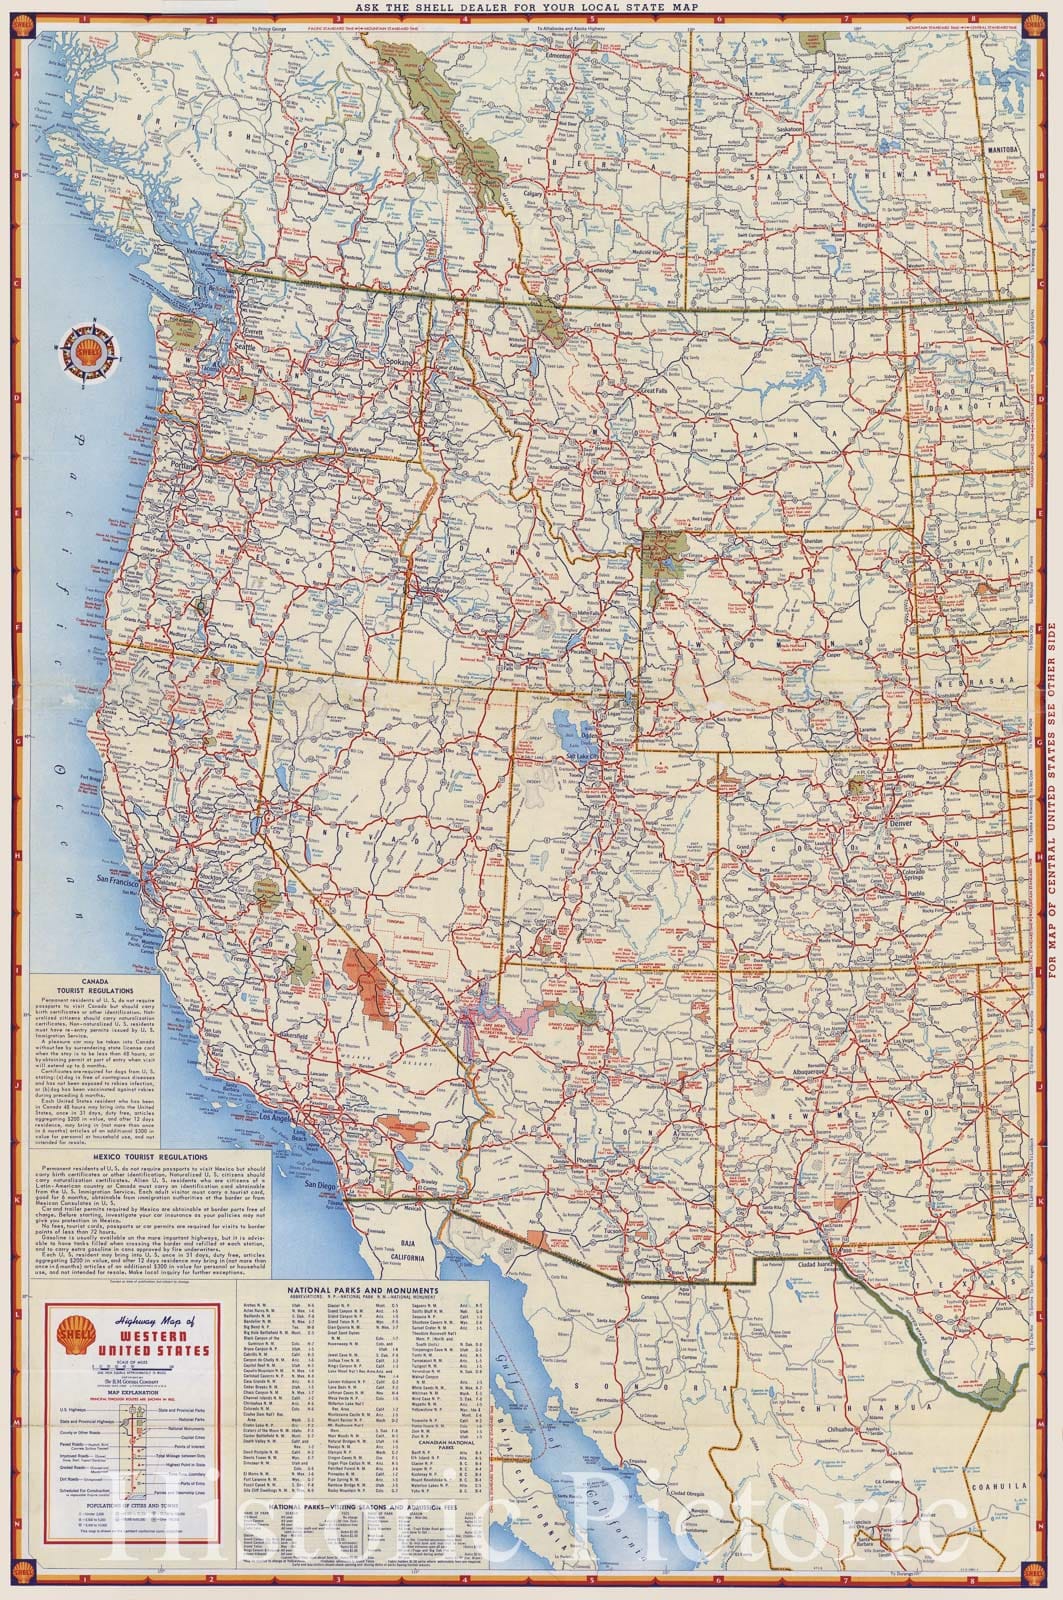 Map of Western United States